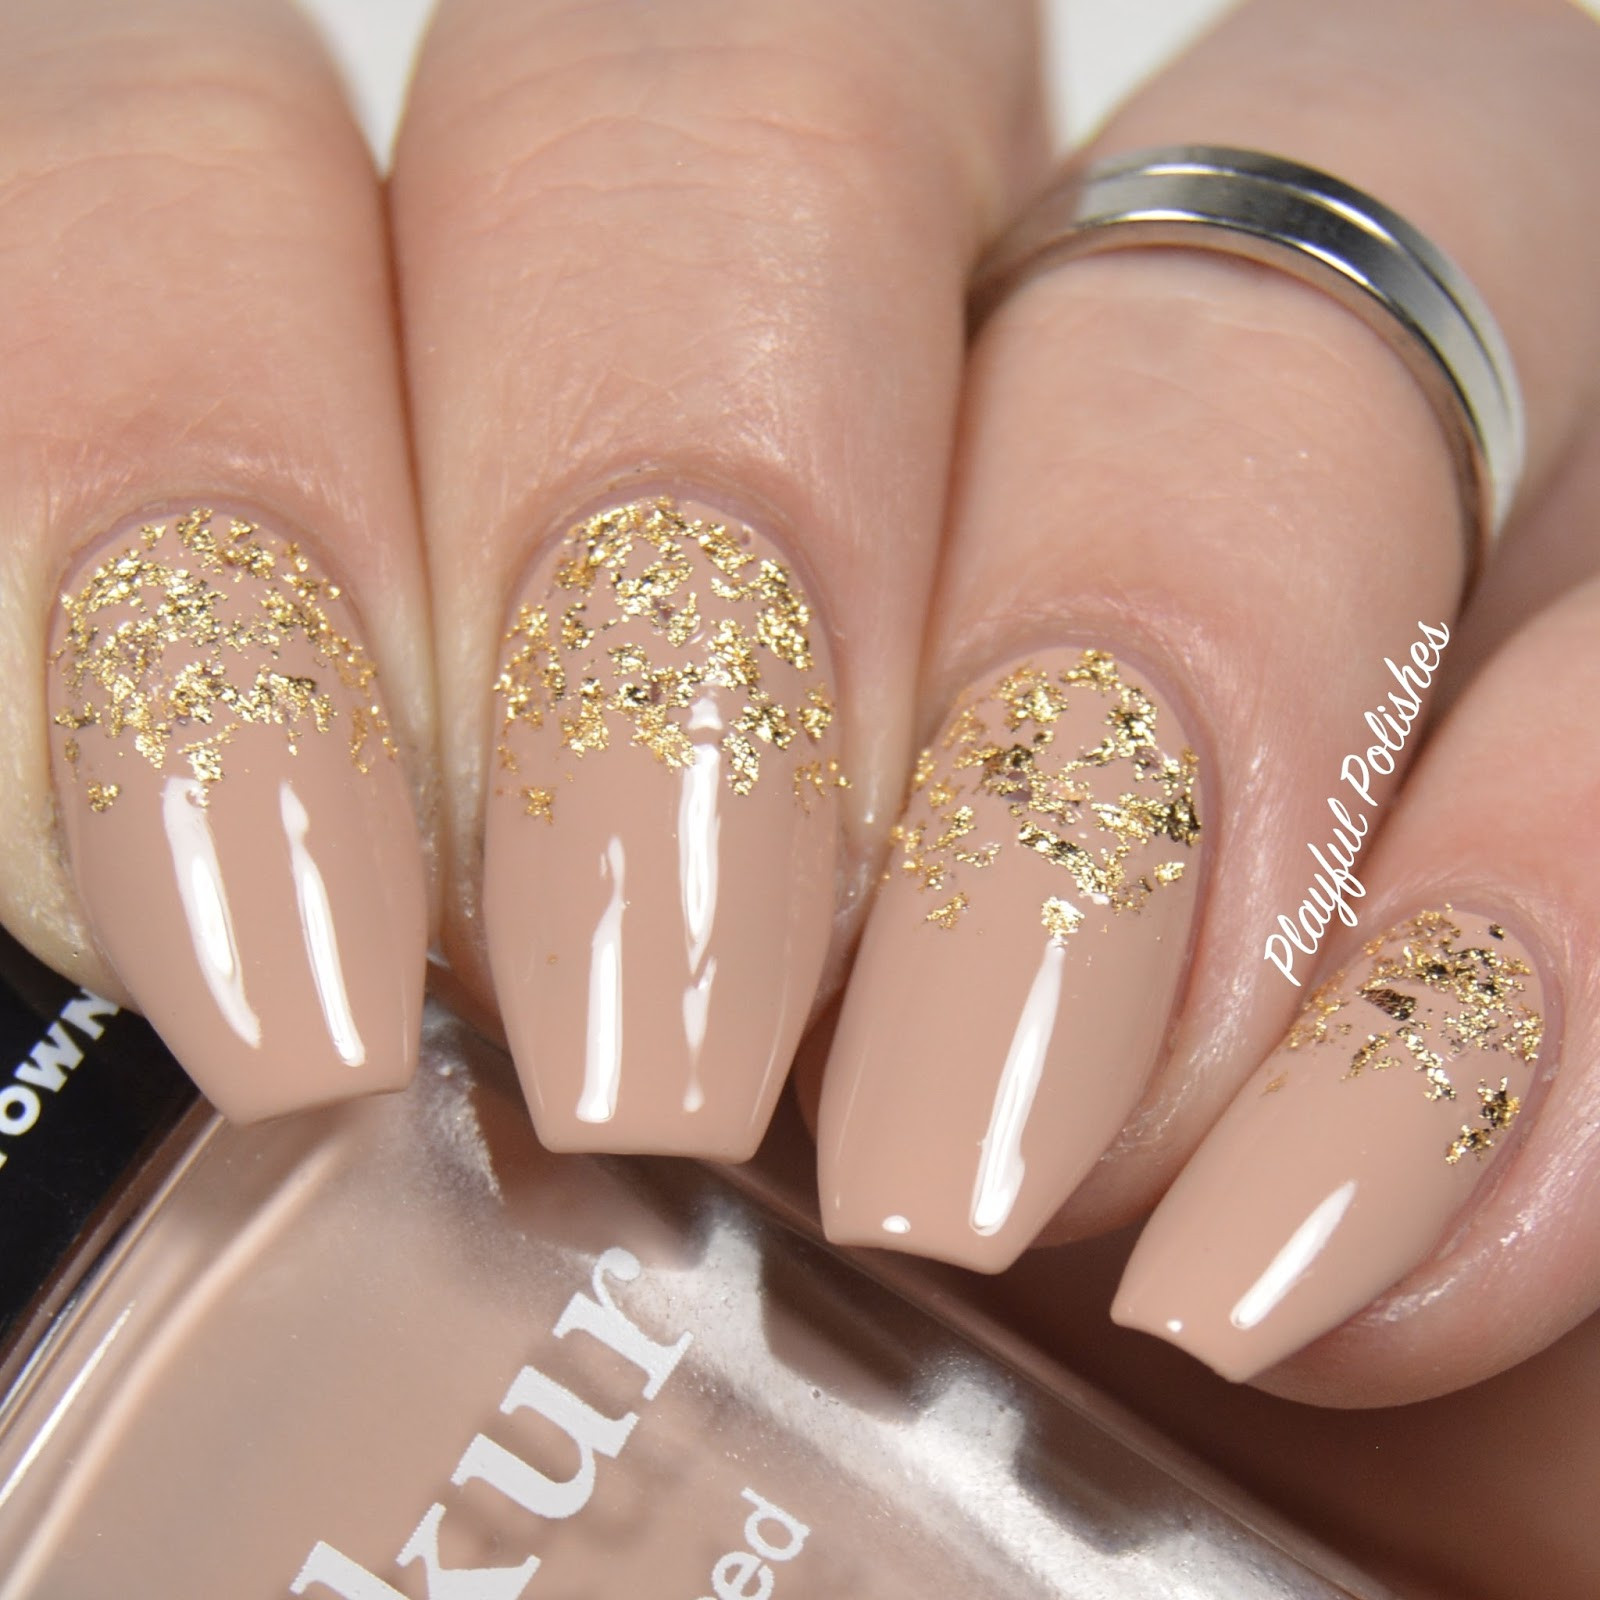 New Years Nail Designs
 Playful Polishes 3 SIMPLE & ELEGANT NEW YEARS NAIL DESIGNS